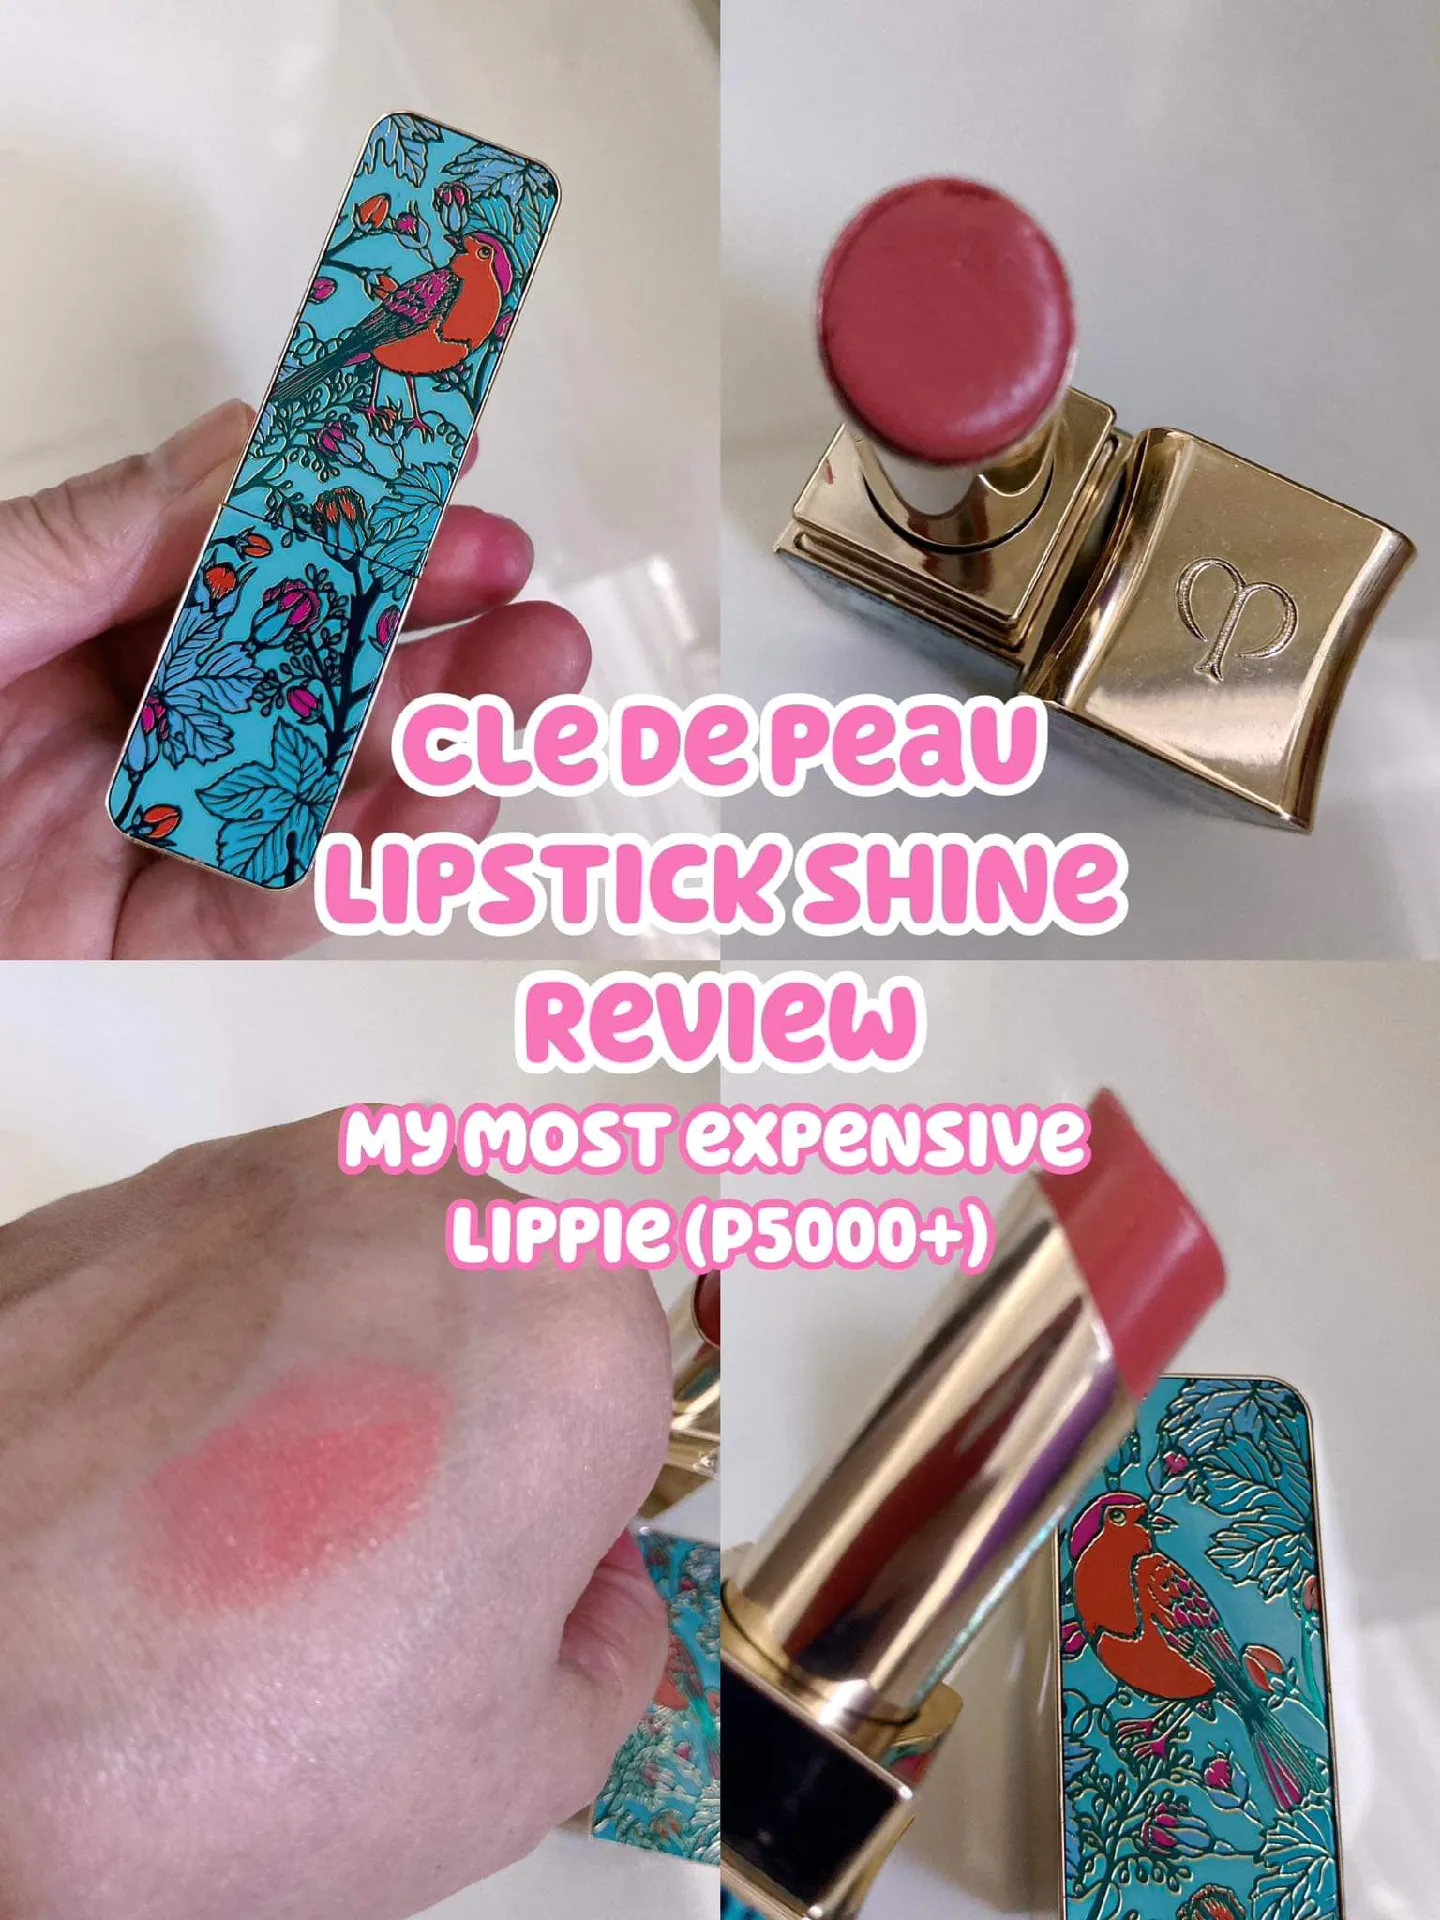 New Lipstick Roundup and Reviews: Bond no. 9, Burberry, Cle de Peau, Gucci,  Sisley – Beauty Unhyped